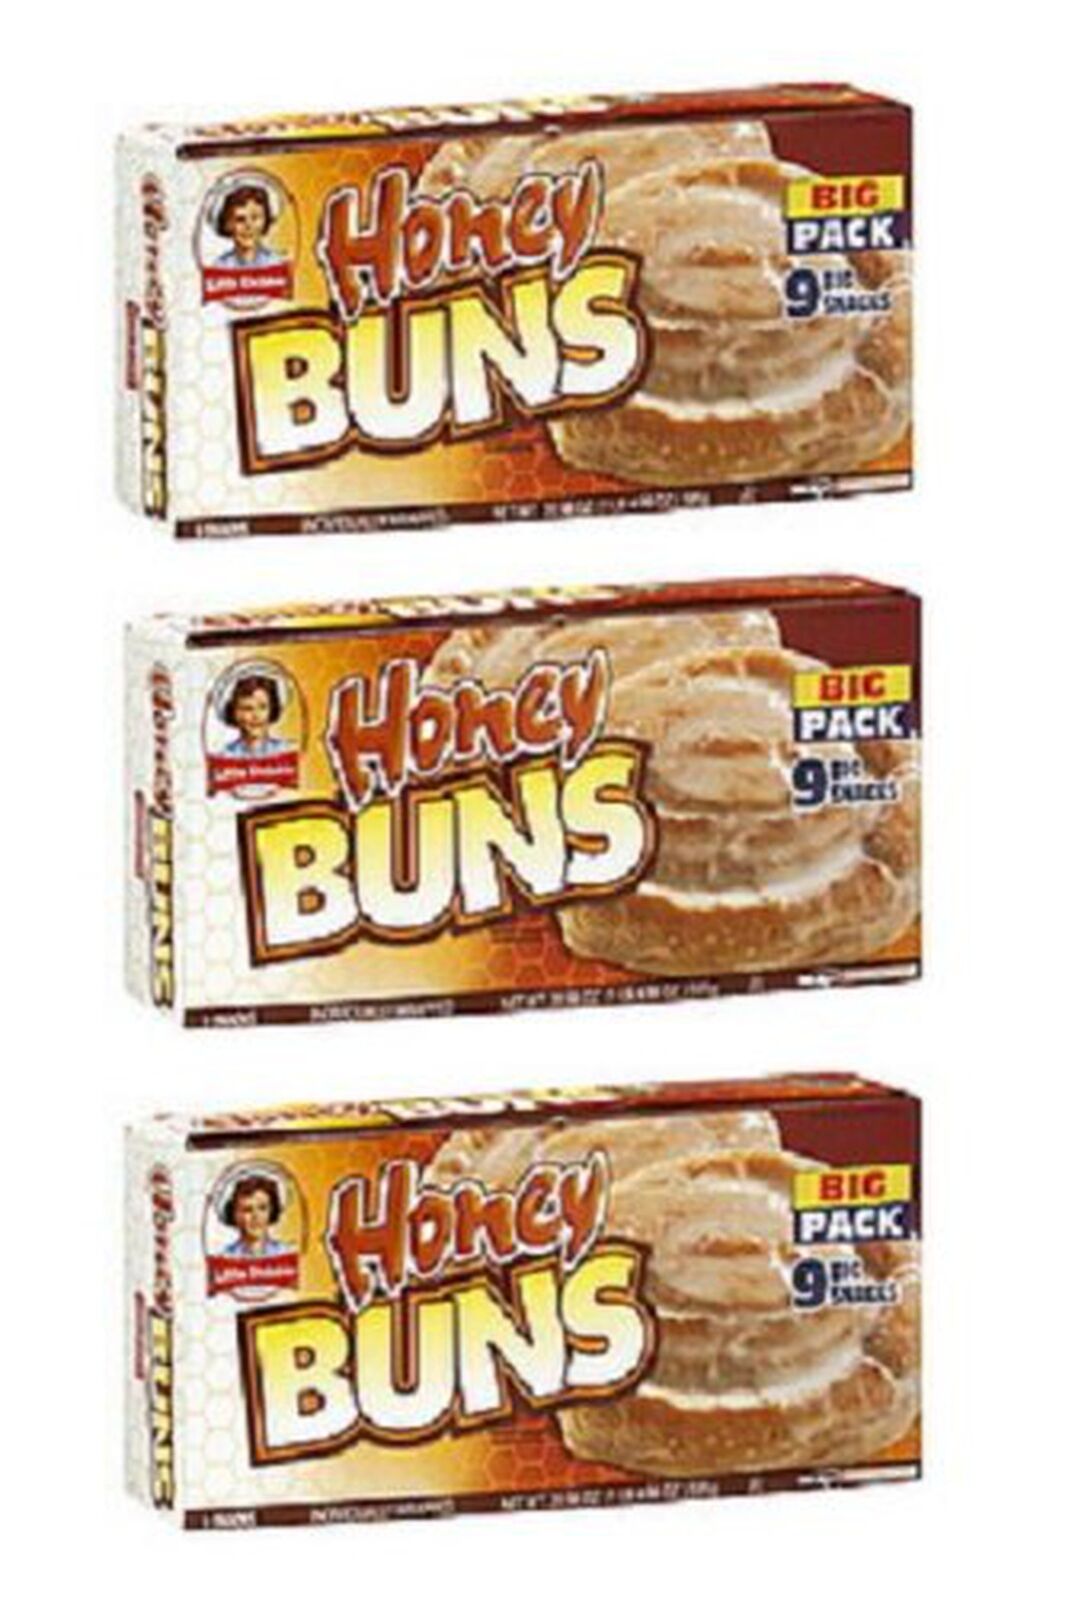 Little Debbie Honey Buns Big Pack: 27 Individually Wrapped Packs